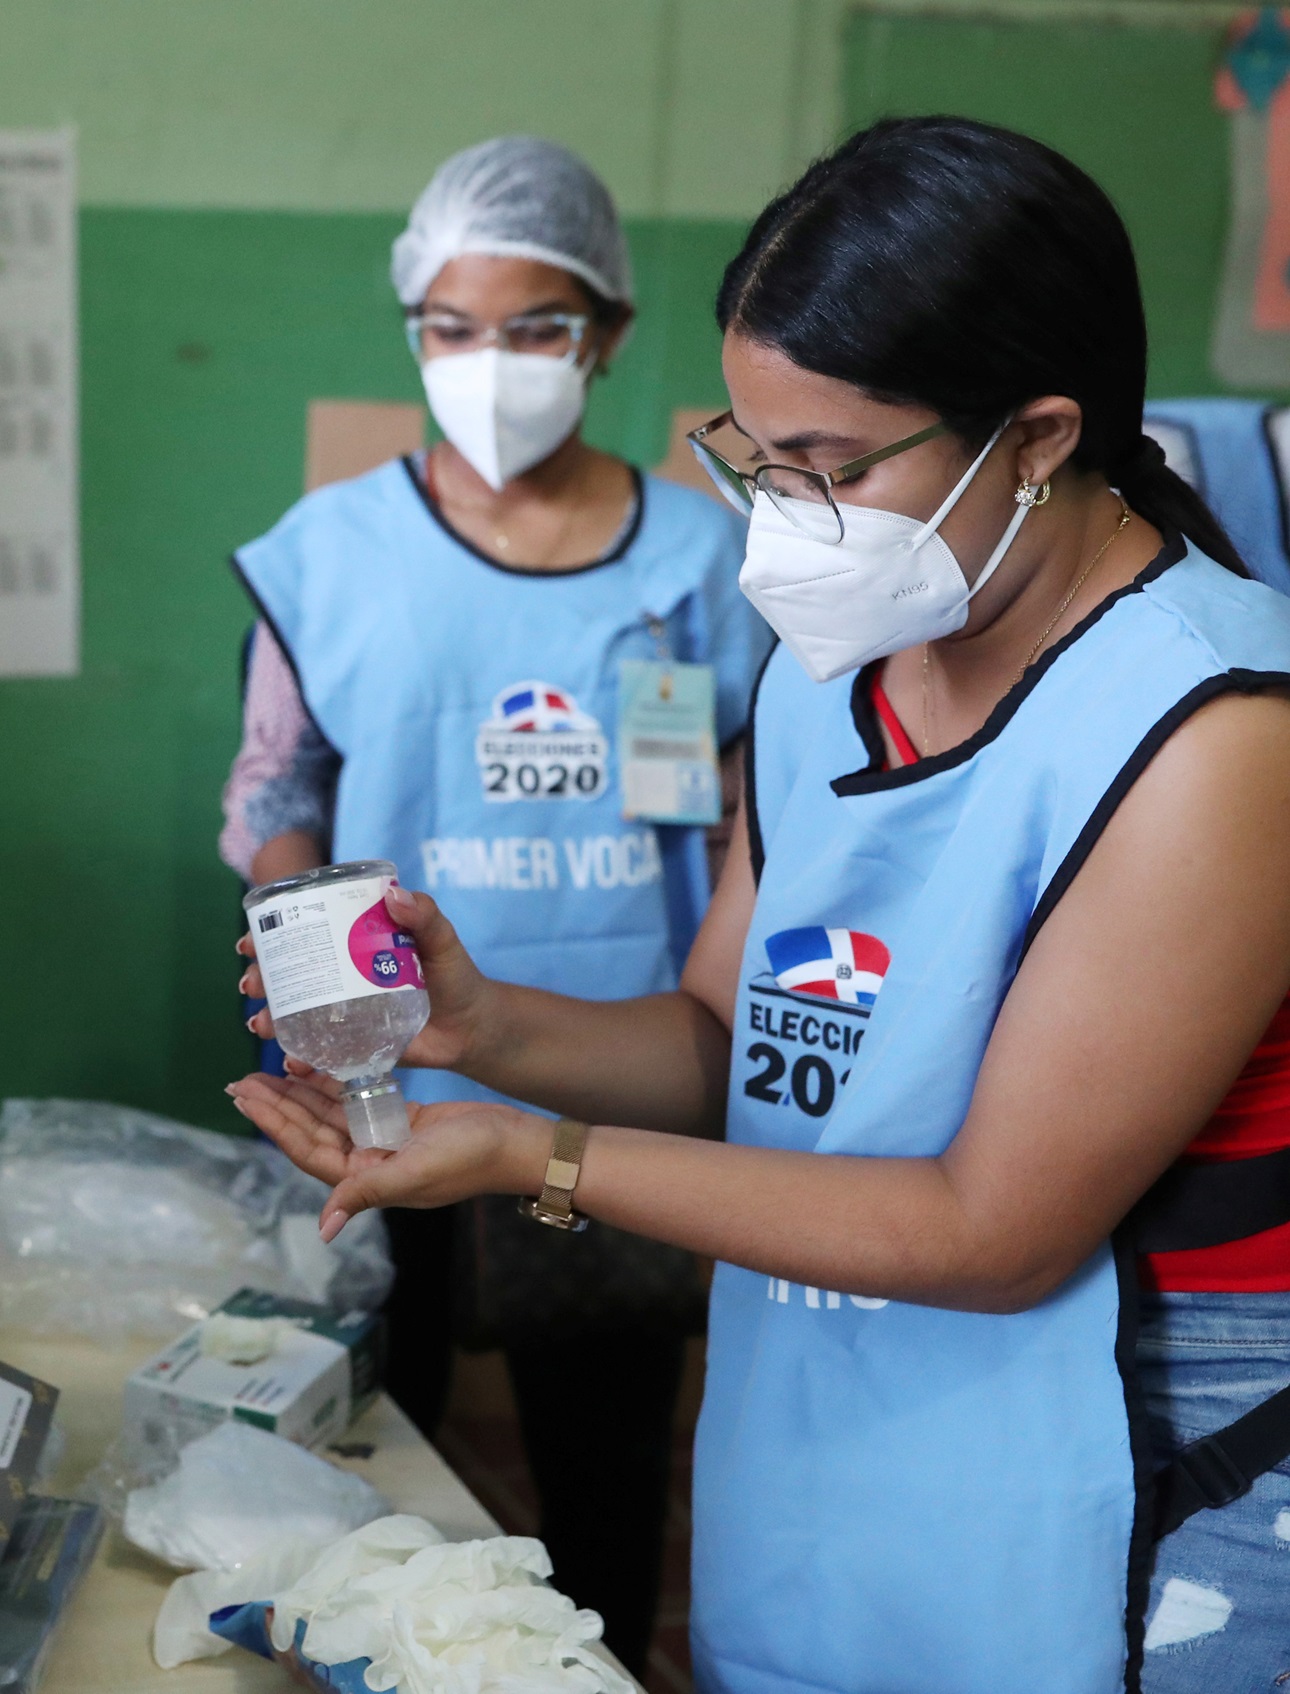 Electoral workers wearing protective masks use hand sanitizer during the outbreak of the coronavirus disease (COVID-19), in Santiago, Dominican Republic July 5, 2020. 